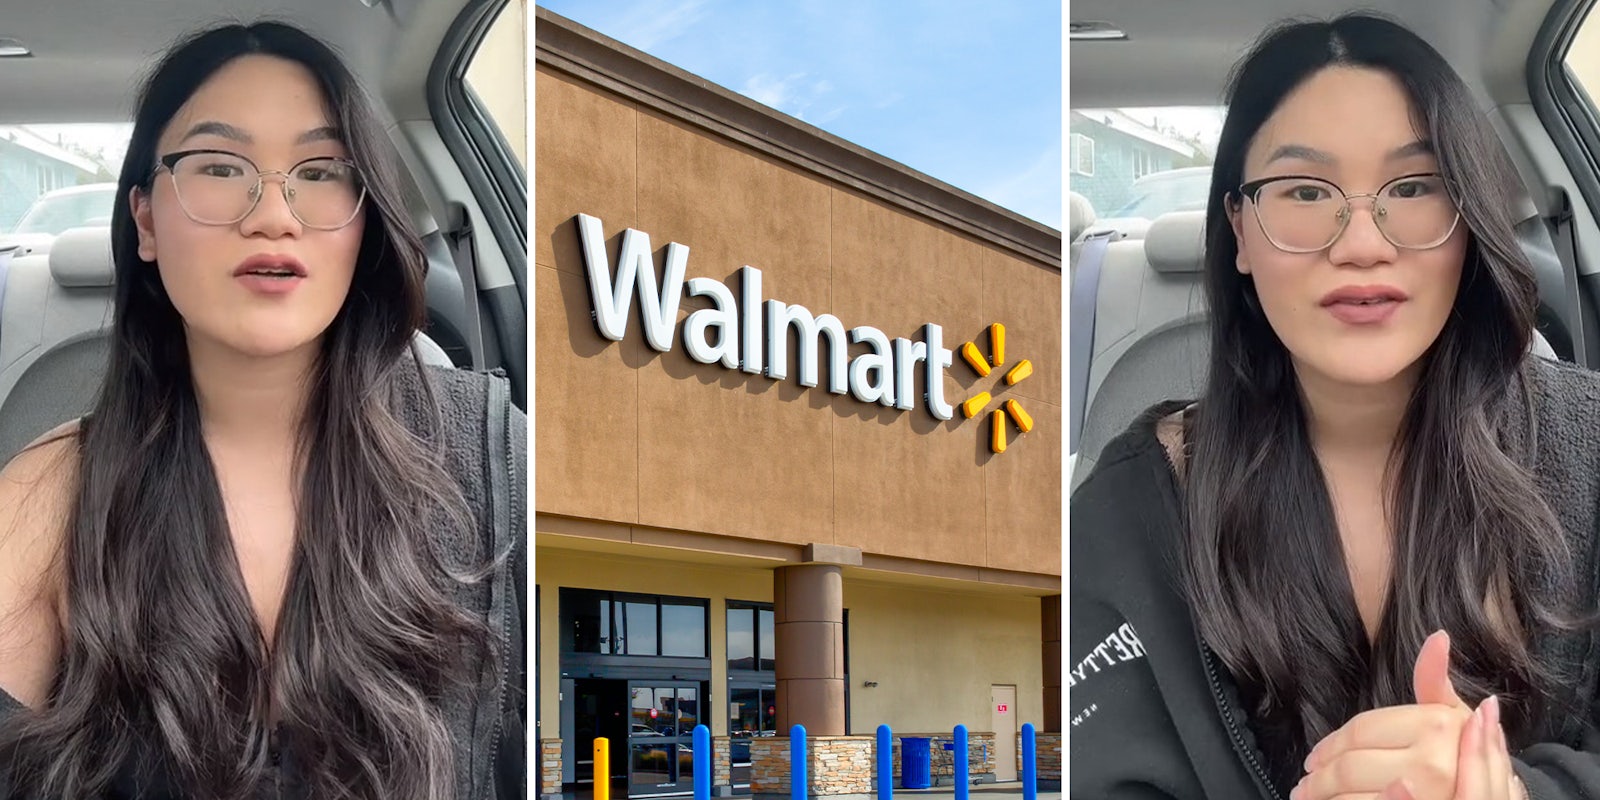 Walmart Worker Walks Out of Job, Says She's 'Never Felt So Free